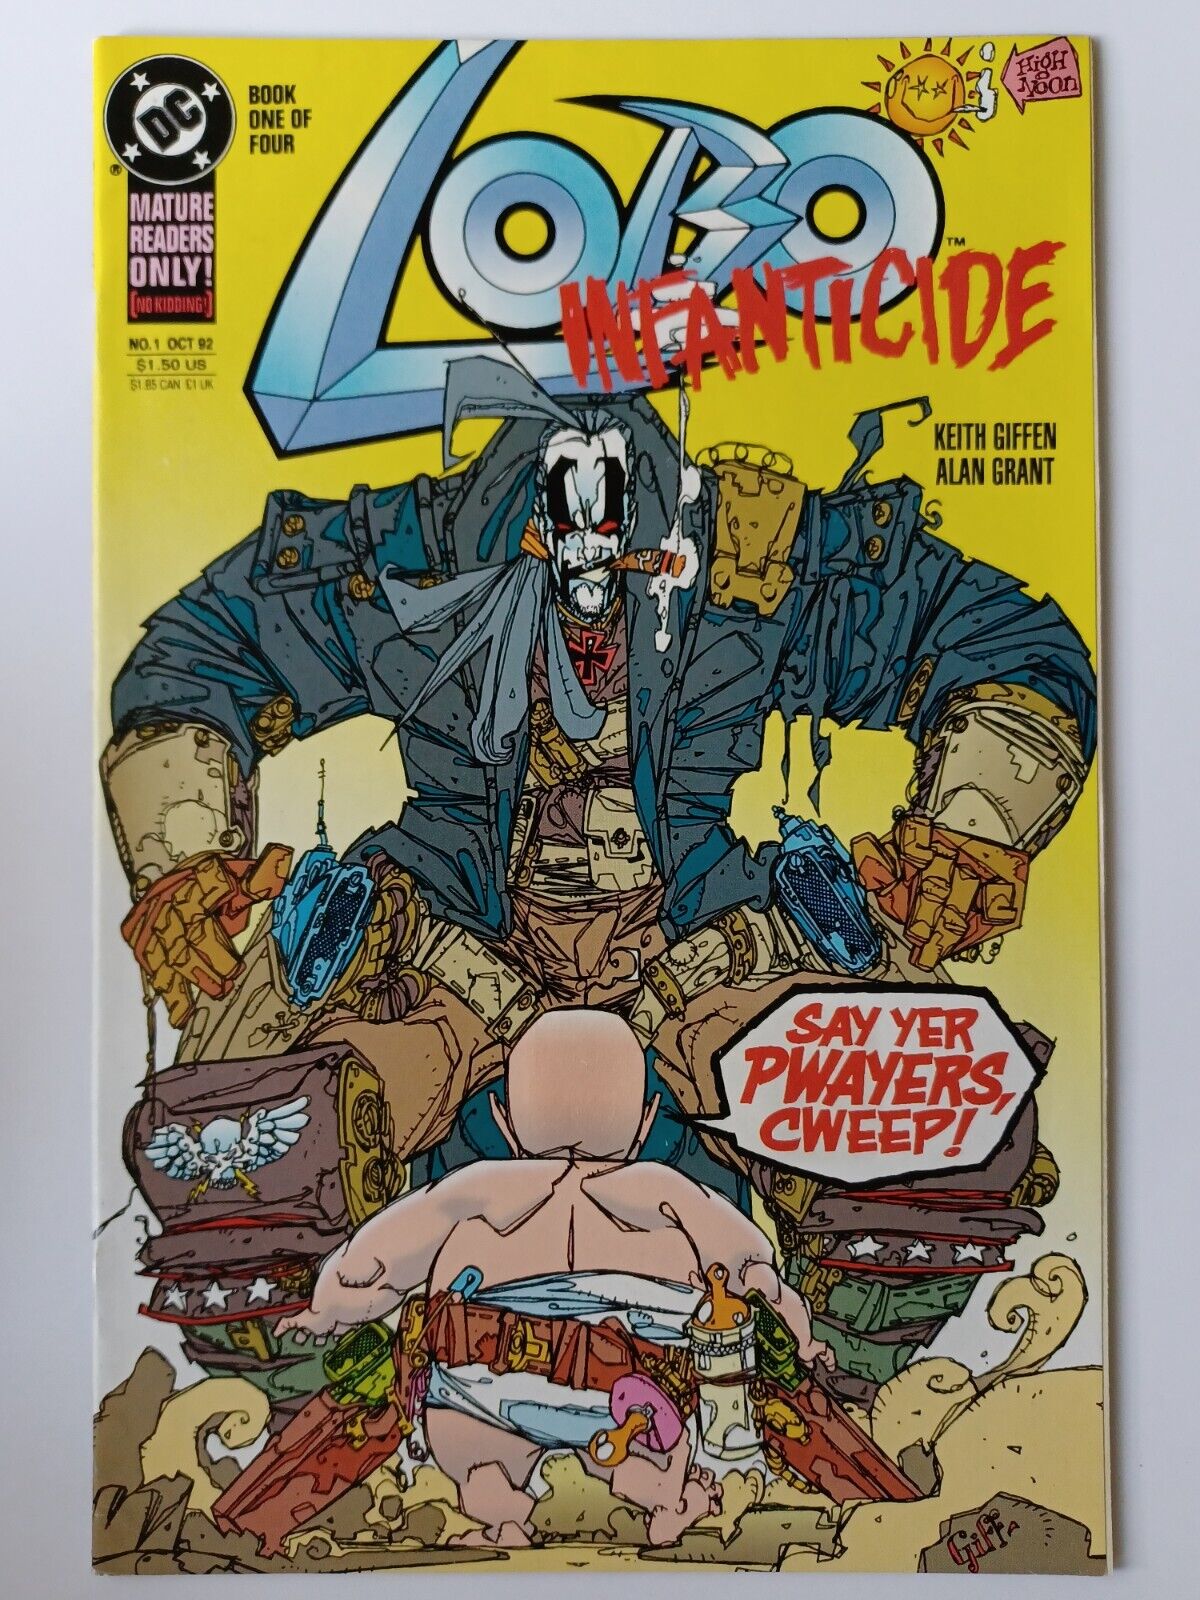 Lobo Infanticide #1 Of 4 - Keith Giffen Art - We Combine Shipping Great Pics